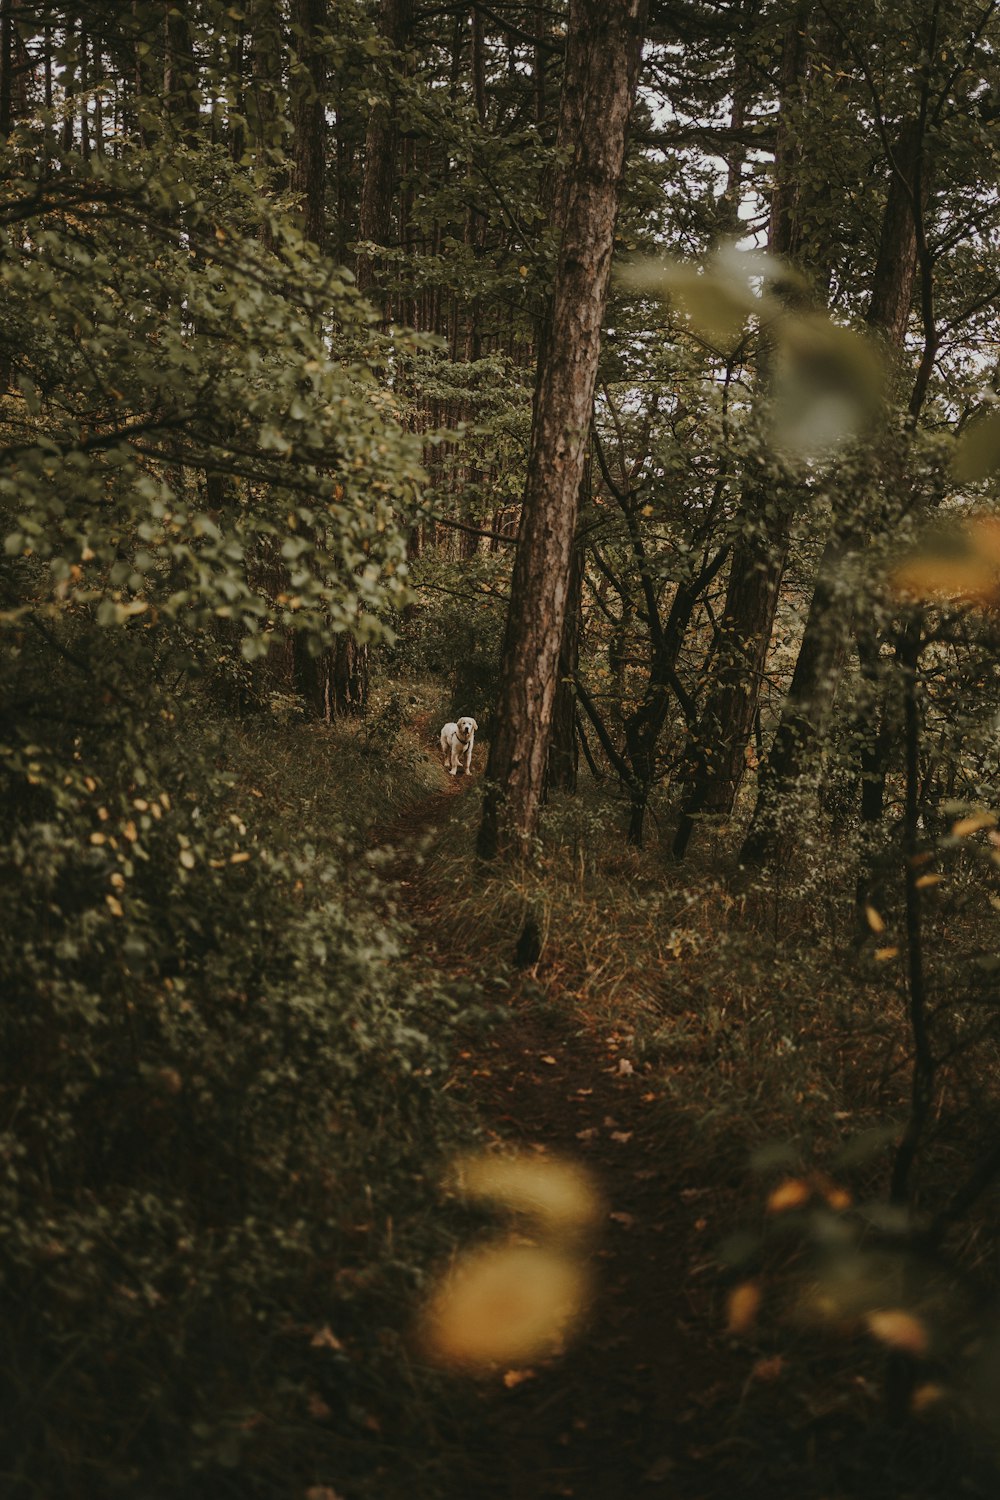 a dog walking through a forest filled with lots of trees